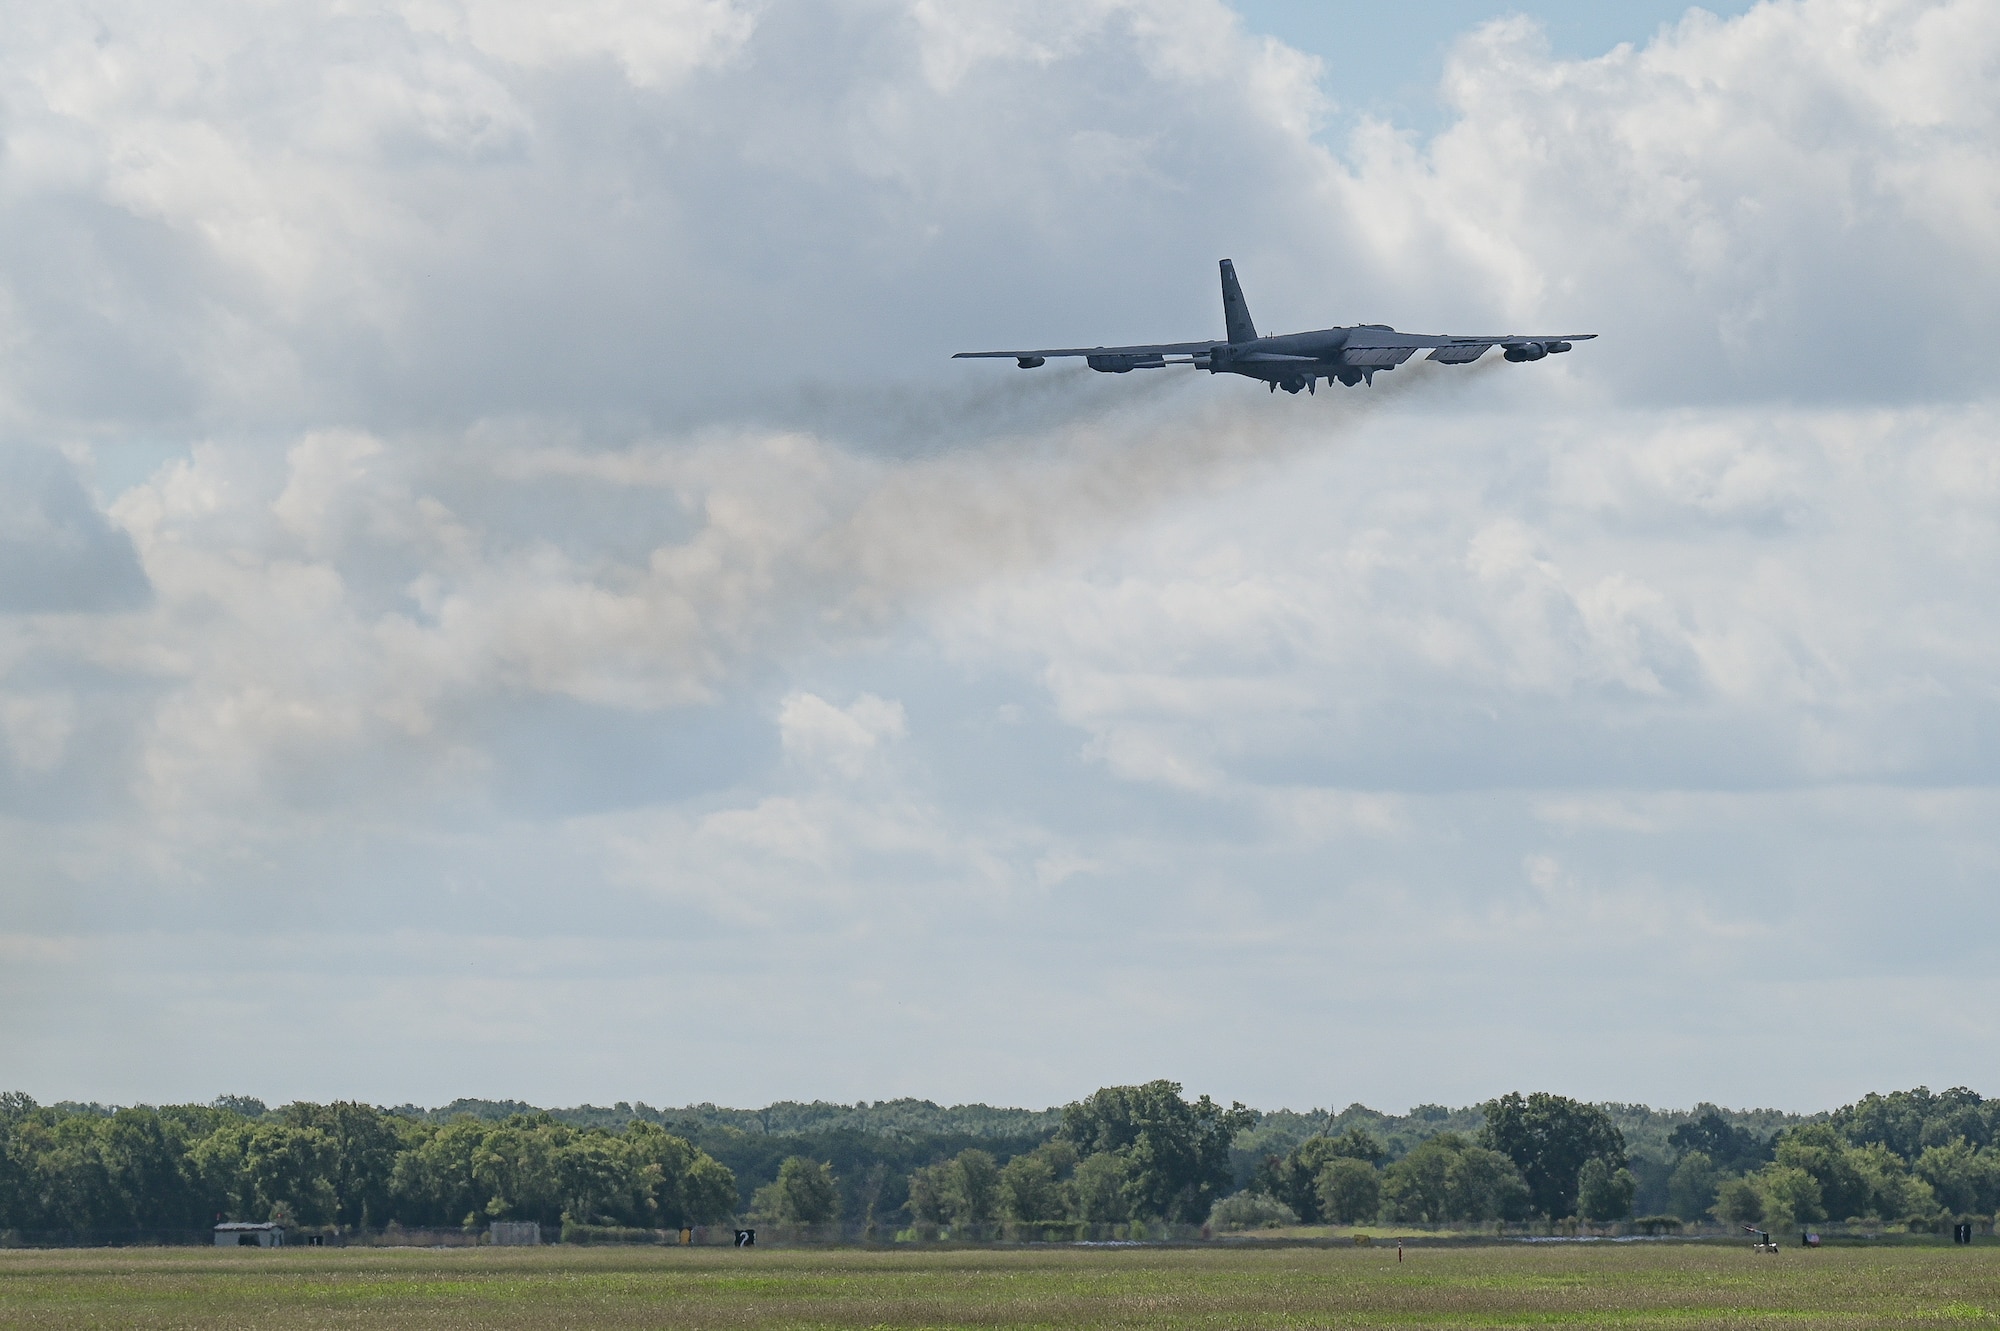 A B-52H Stratofortress prepares to take off from Barksdale Air Force Base in support of RIMPAC 2022, Aug. 1, 2022. Twenty-six nations, 38 ships, three submarines, more than 170 aircraft and 25,000 personnel are participating in RIMPAC from June 29 to Aug. 4 in and around the Hawaiian Islands and Southern California. The world’s largest international maritime exercise, RIMPAC provides a unique training opportunity while fostering and sustaining cooperative relationships among participants critical to ensuring the safety of sea lanes and security on the world’s oceans. RIMPAC 2022 is the 28th exercise in the series that began in 1971. (U.S. Air Force photo by Senior Airman Jonathan E. Ramos)